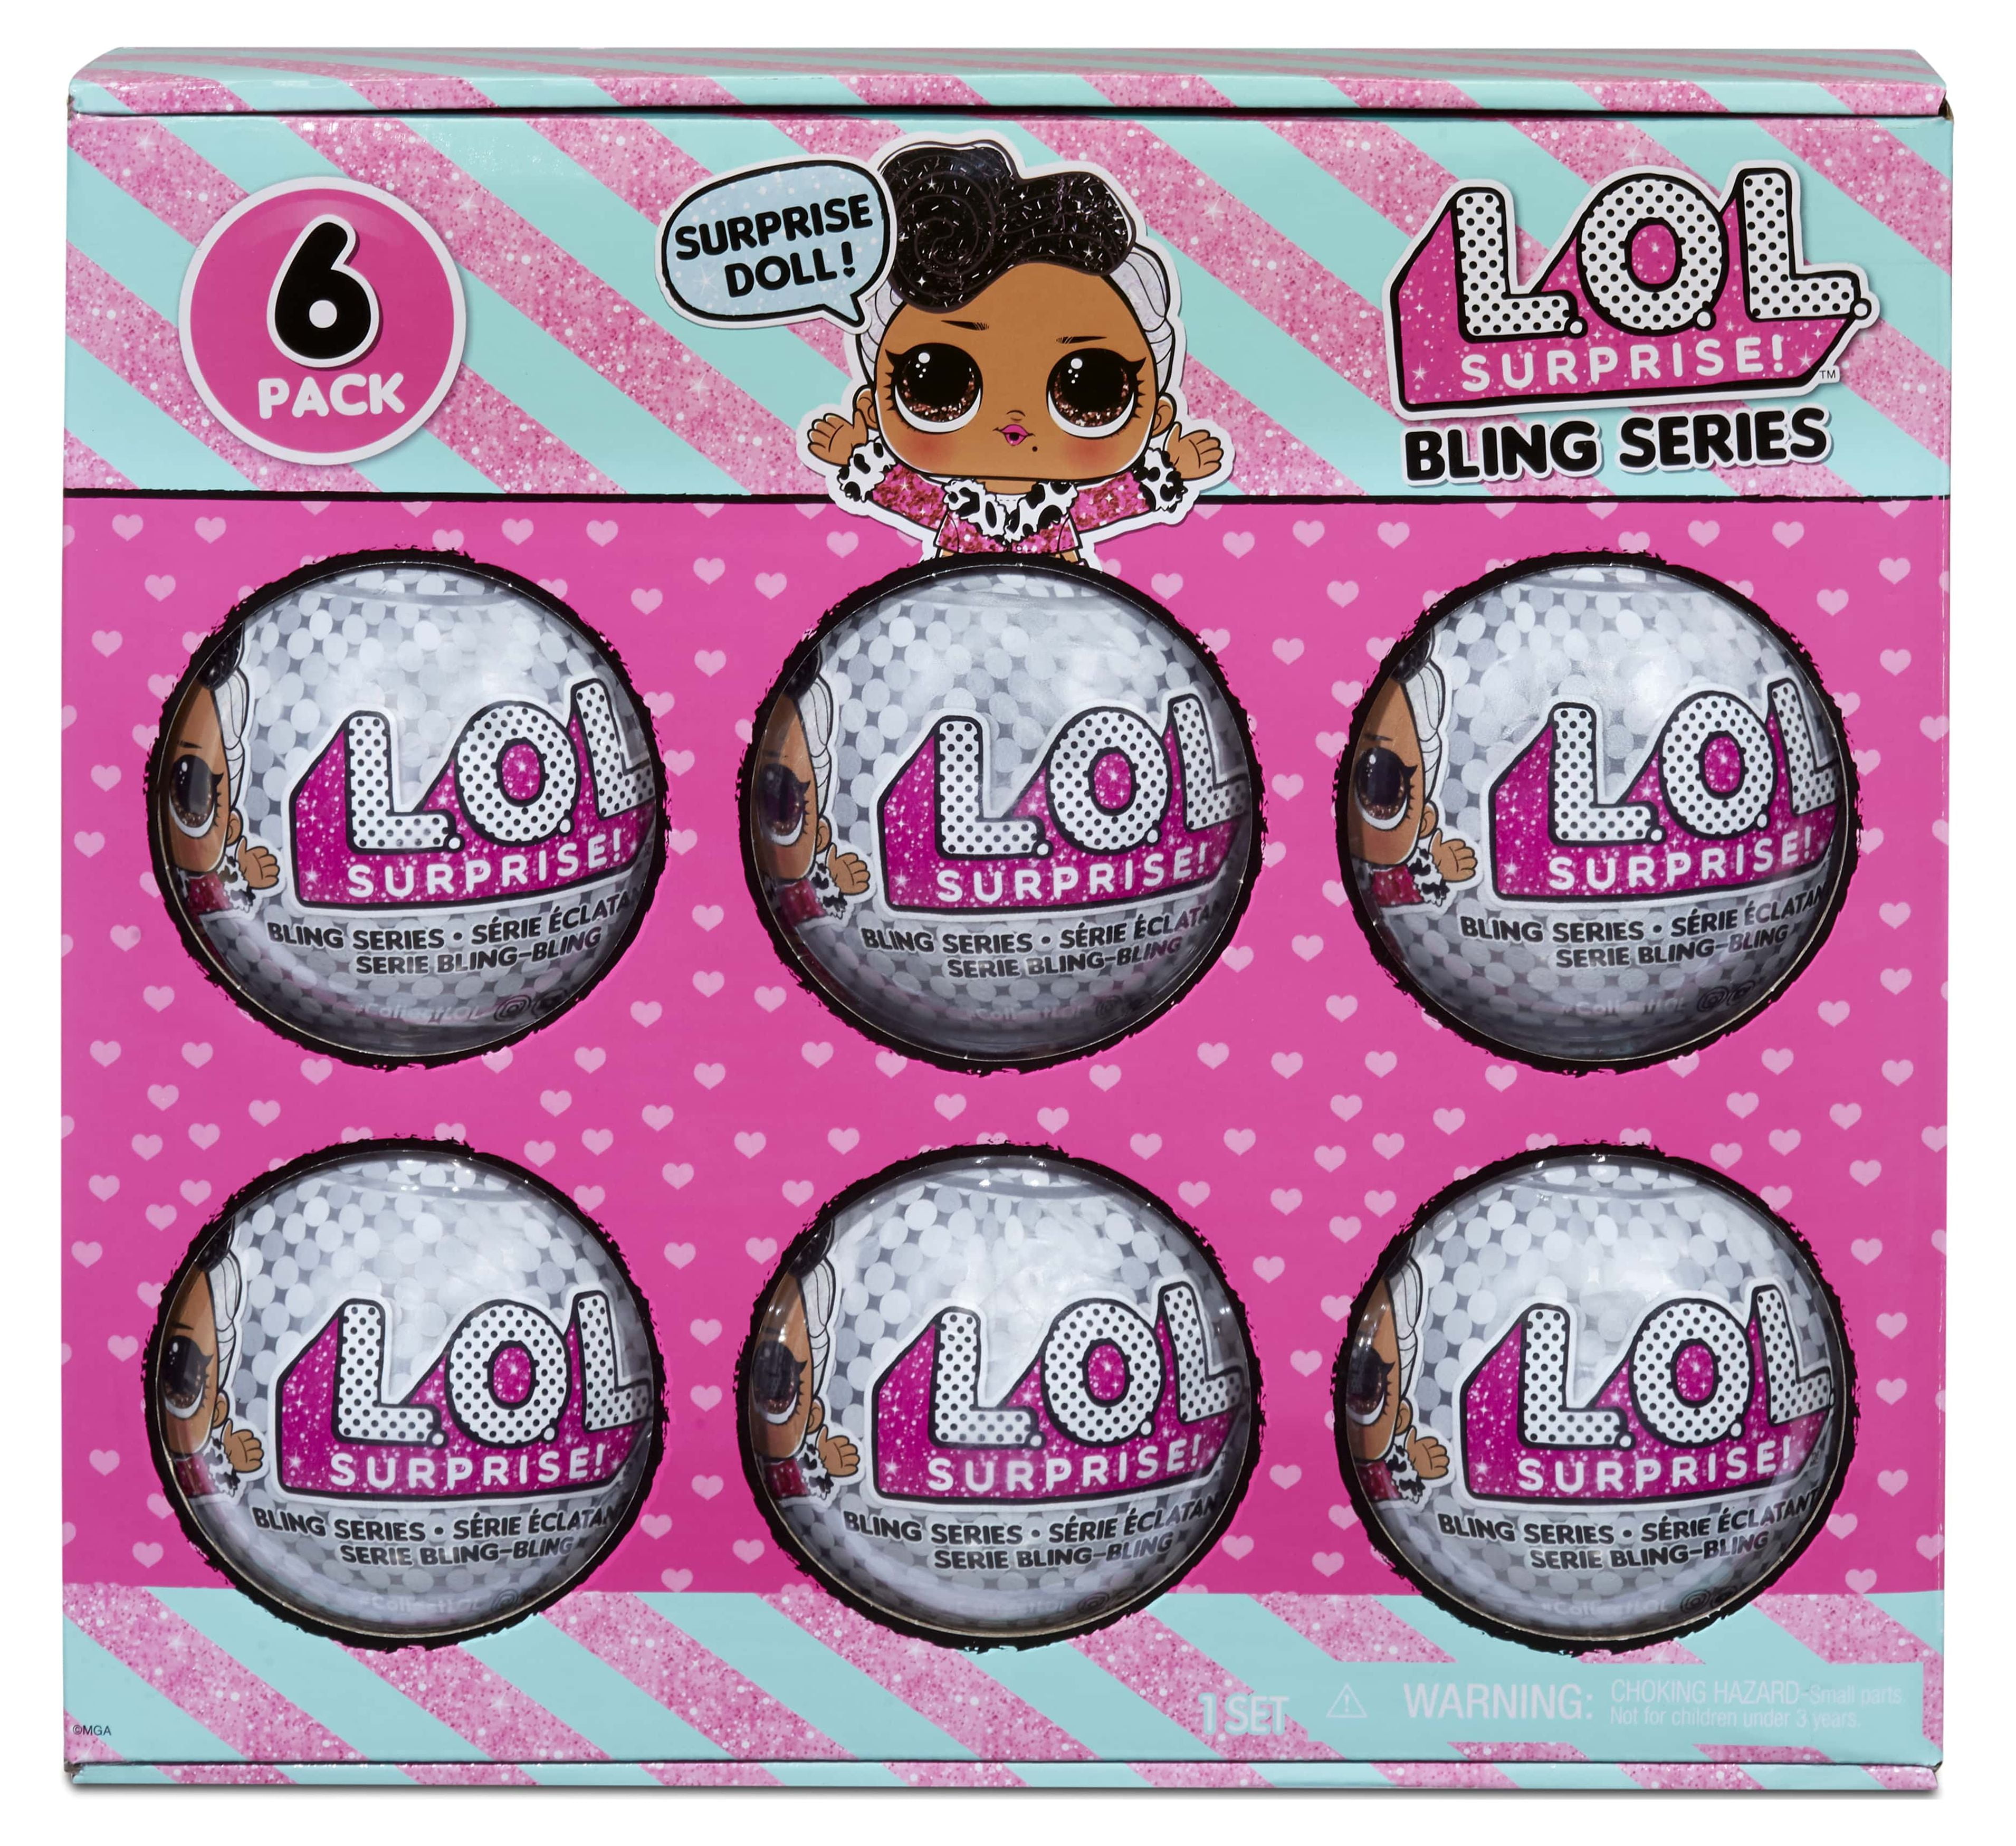 LO LOL Dolls Stationery Set for Girls - 3 Pc Bundle with Art Set, Unicorn  Stampers, and Door Hanger | Kit Tote Bag Stickers, Sketchpad, More